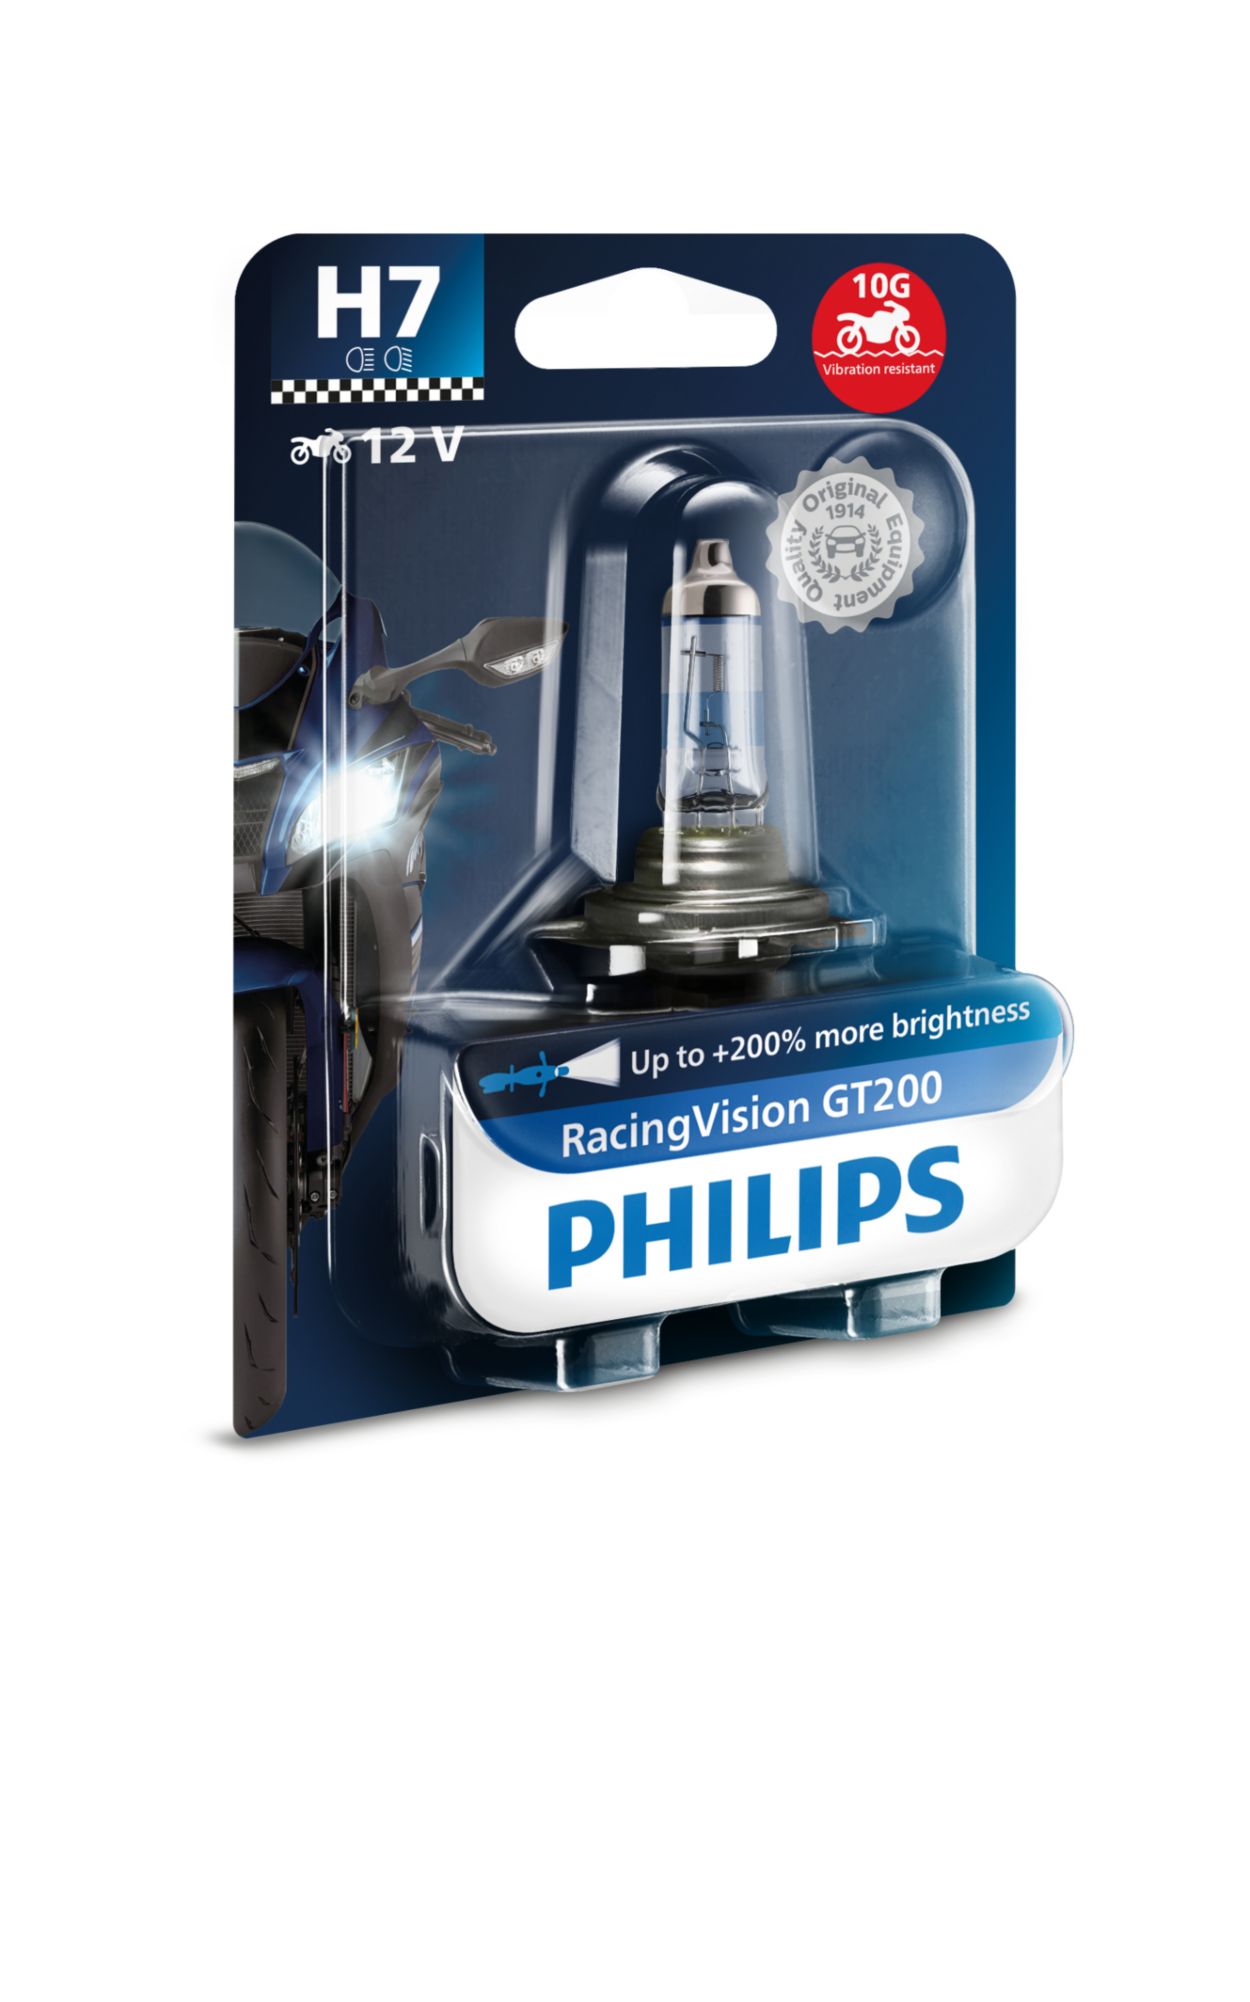 Philips PHILIPS RACINGVISION GT200 H7 55W